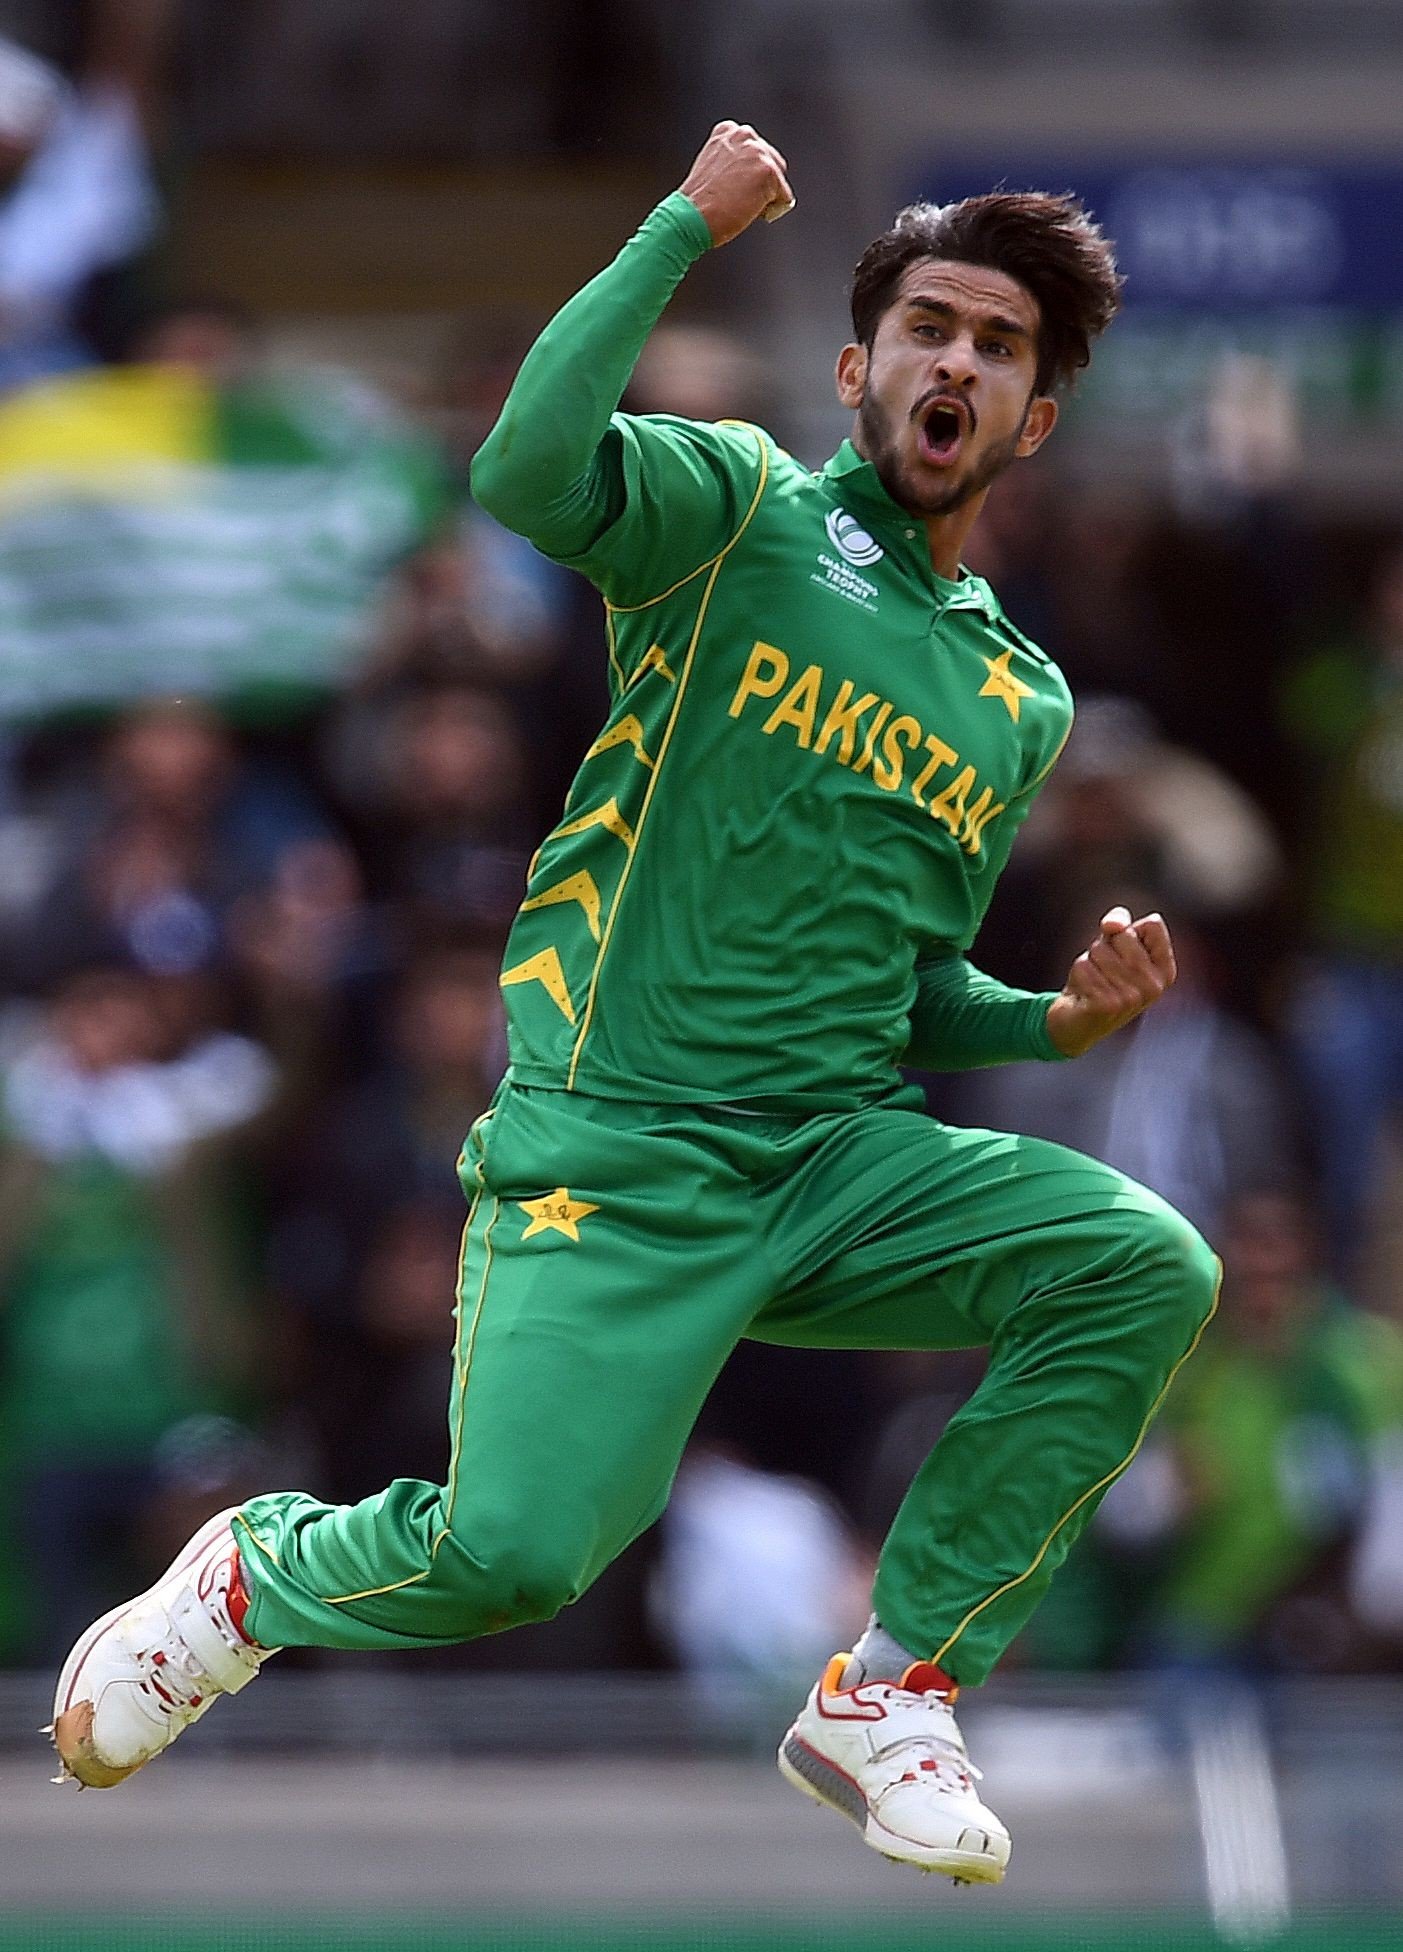 Pakistan's Hasan Ali celebrates a wicket against South Africa in the Champions Trophy. Photo: AFP